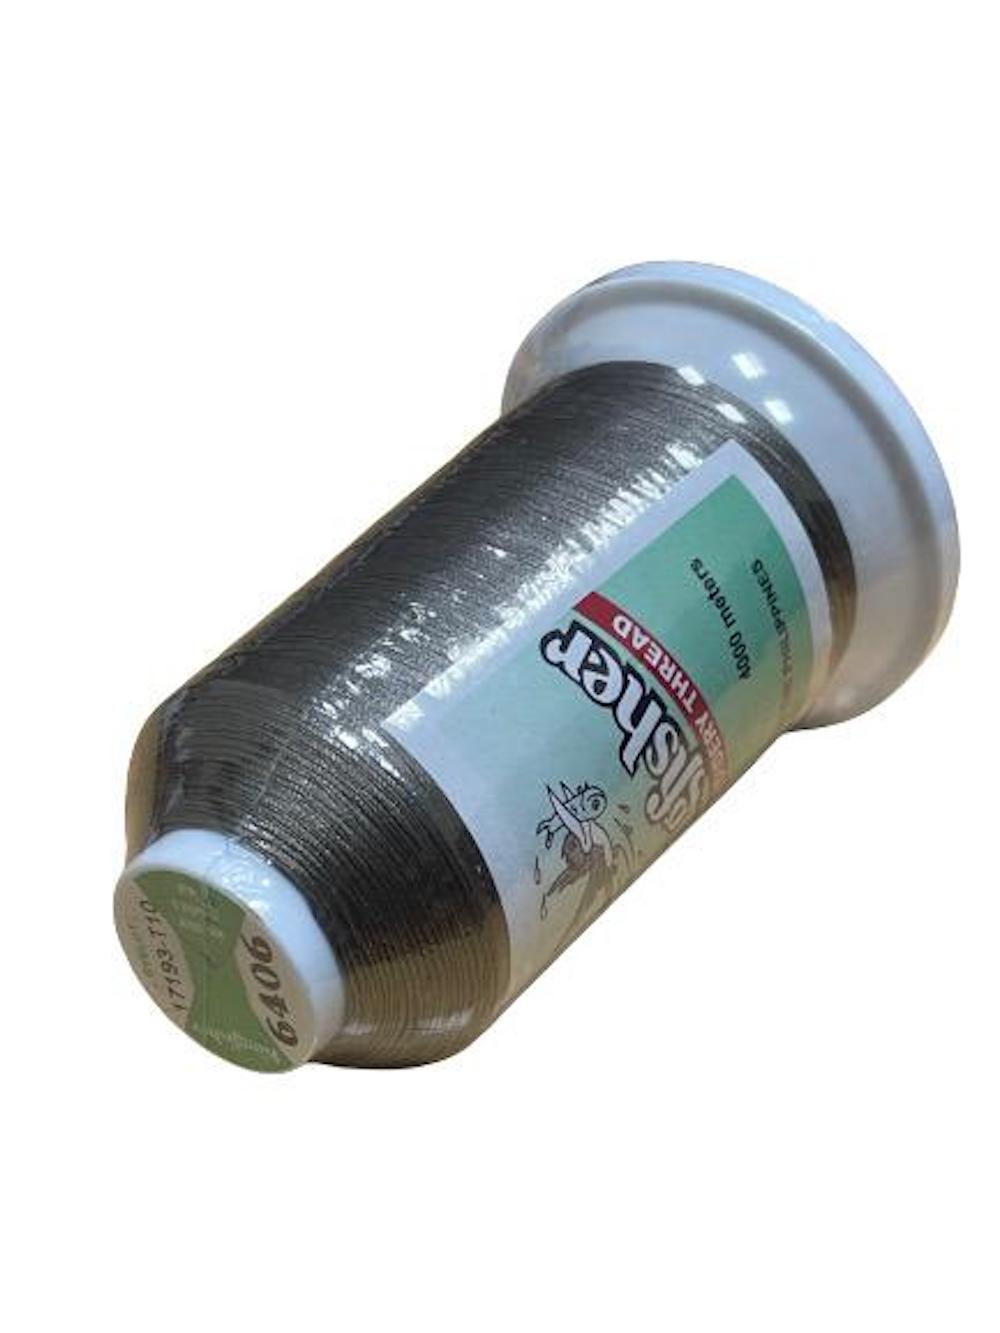 King Fisher Embroidery Thread 4000m 6406 - MY SEWING MALL